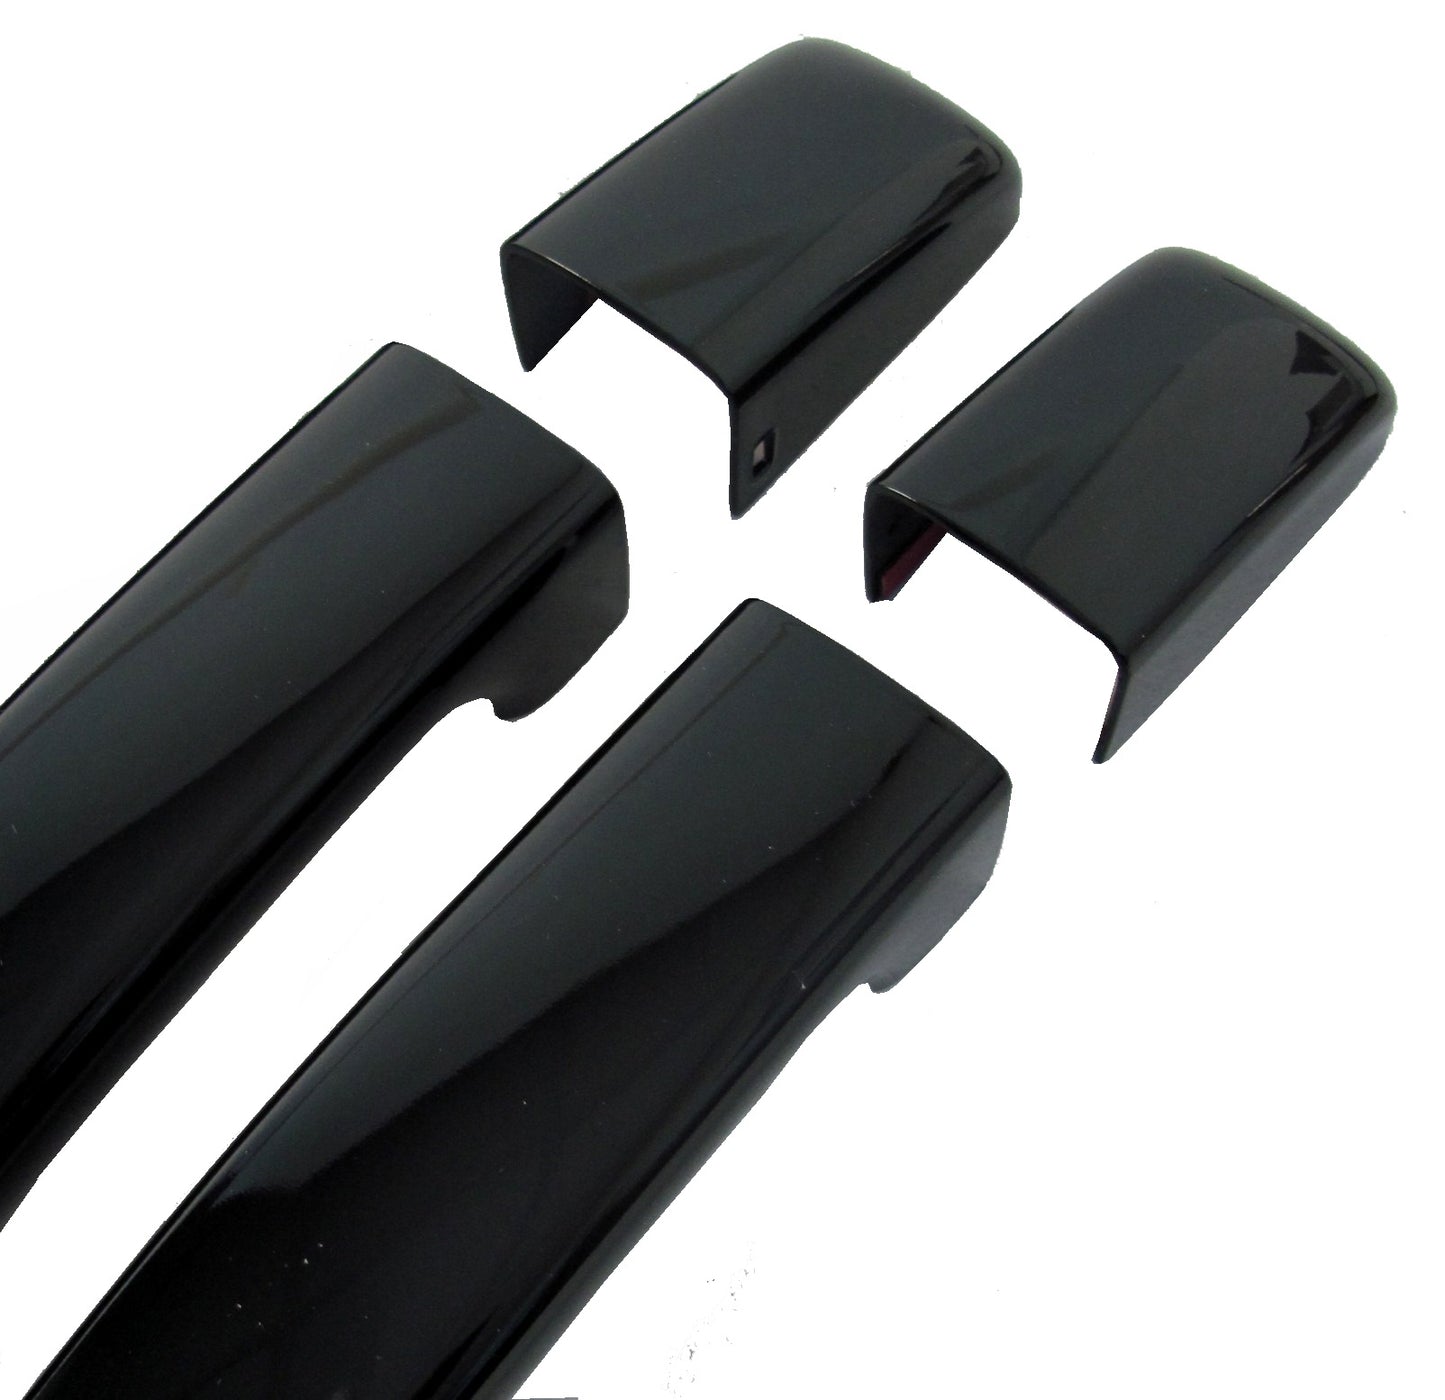 Door Handle Covers for Range Rover Sport L320 fitted with 2 pc Handles  - Java Black